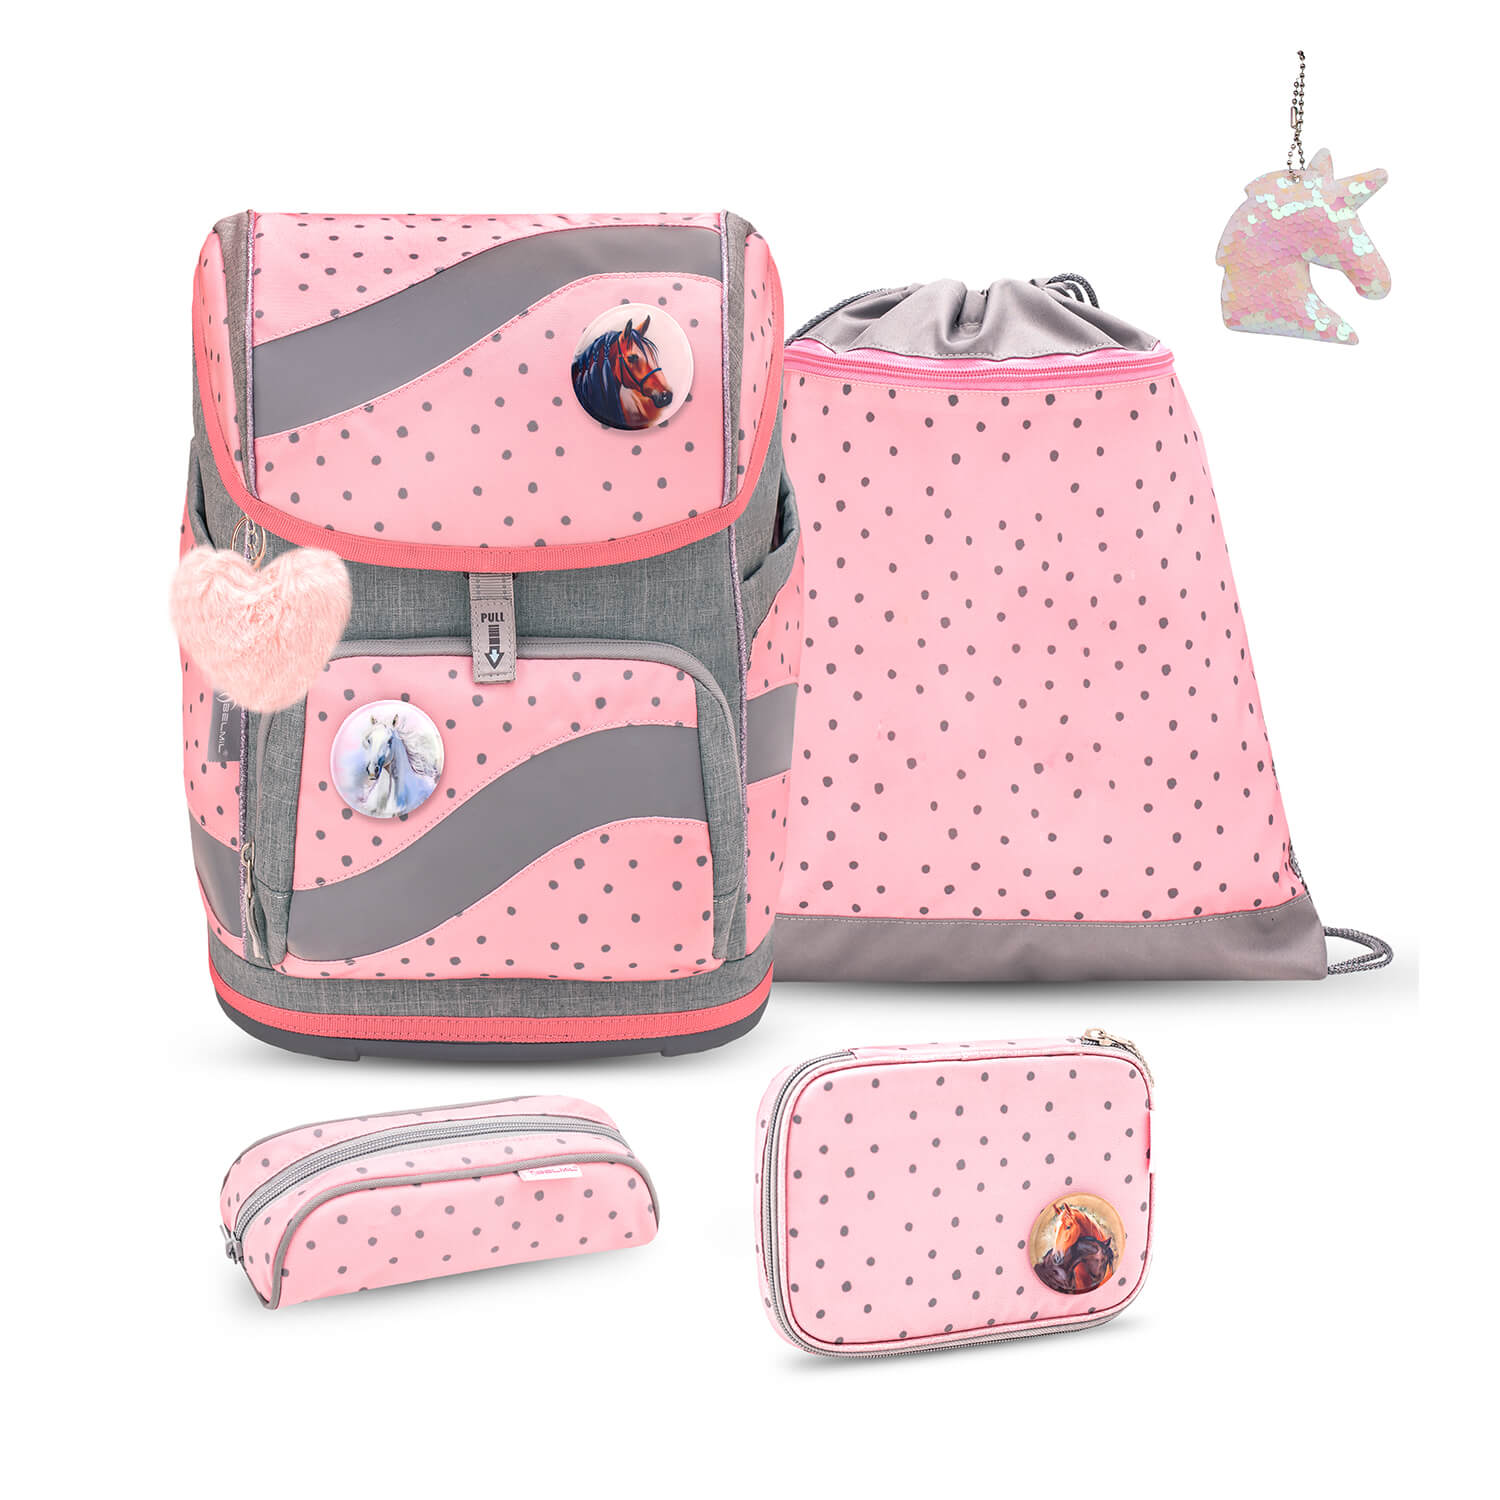 Smarty Pink Dots 2 schoolbag set 6 pcs with GRATIS keychain